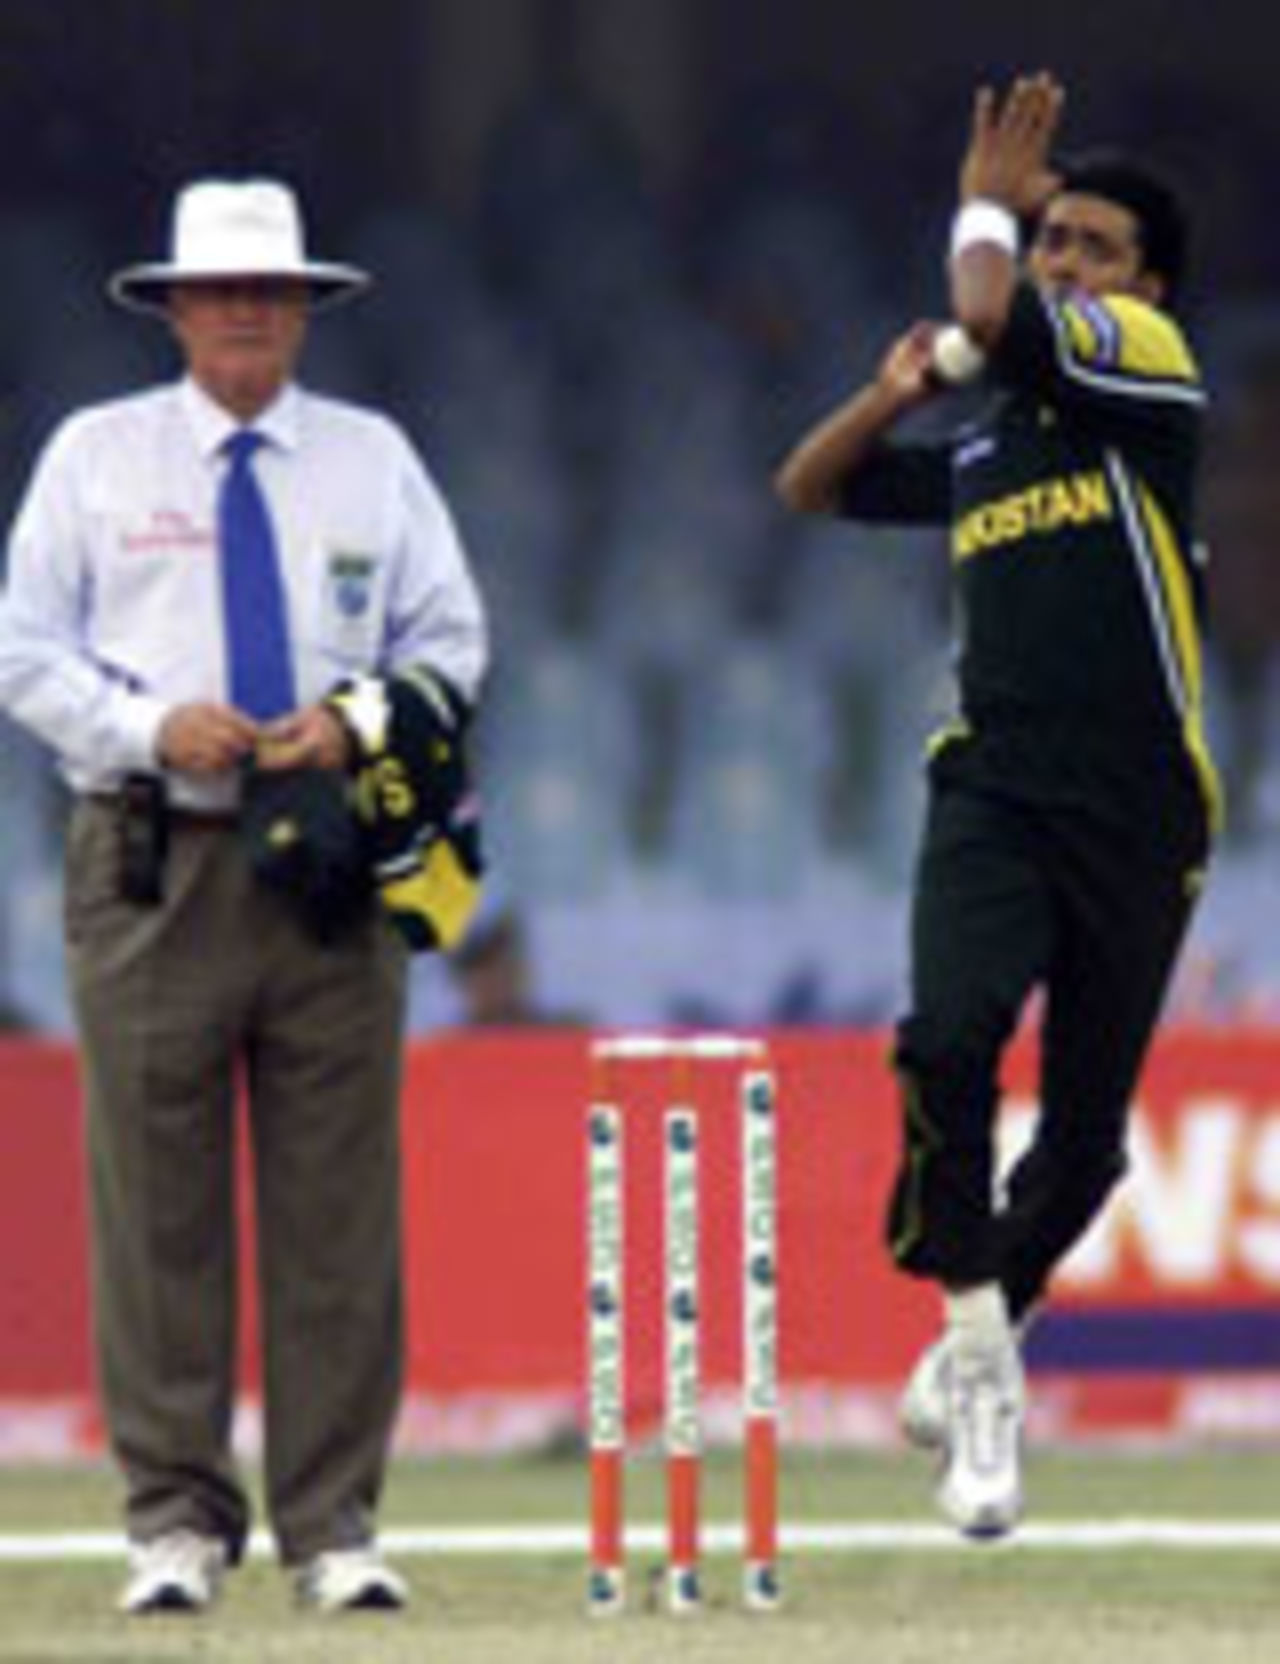 Mohammad Sami during his career best 5-wicket spell, Pakistan v New Zealand, 2nd ODI, Lahore, December 1, 2003.